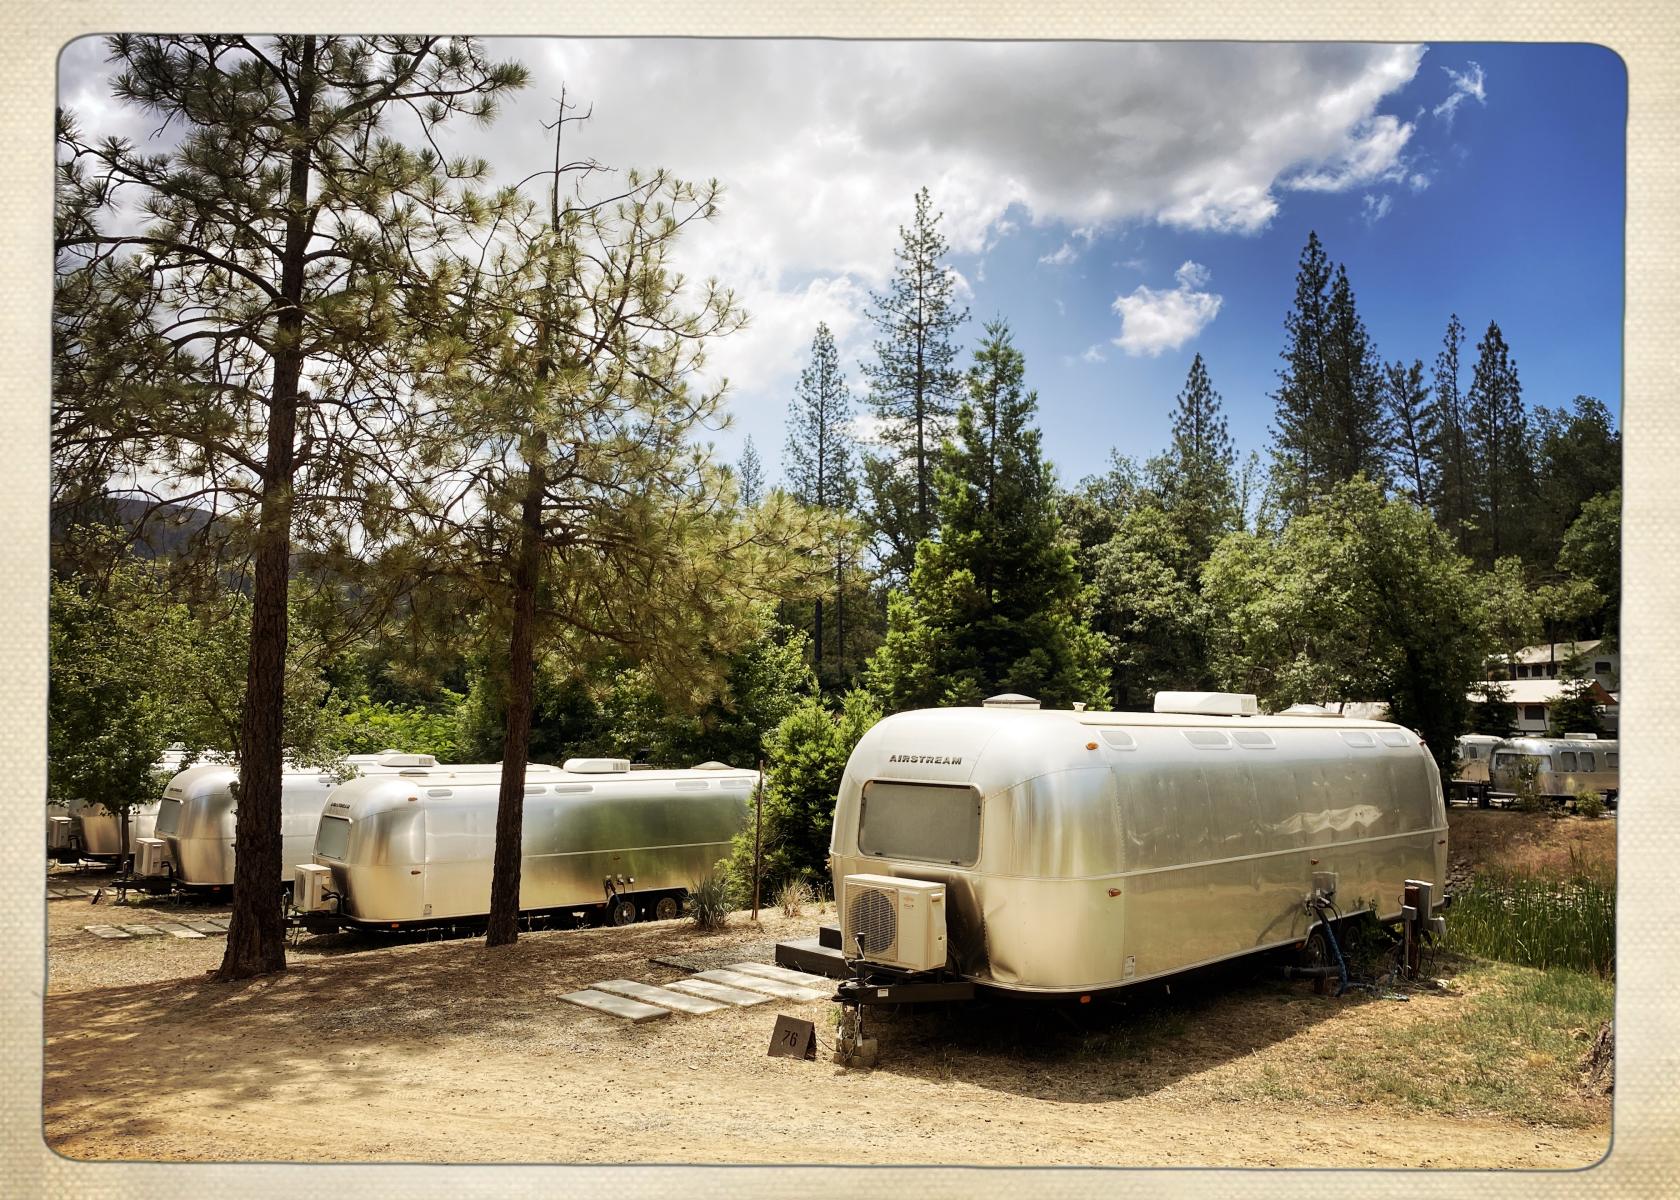 Autocamp in Midpines, a neighborhood of Airstreams